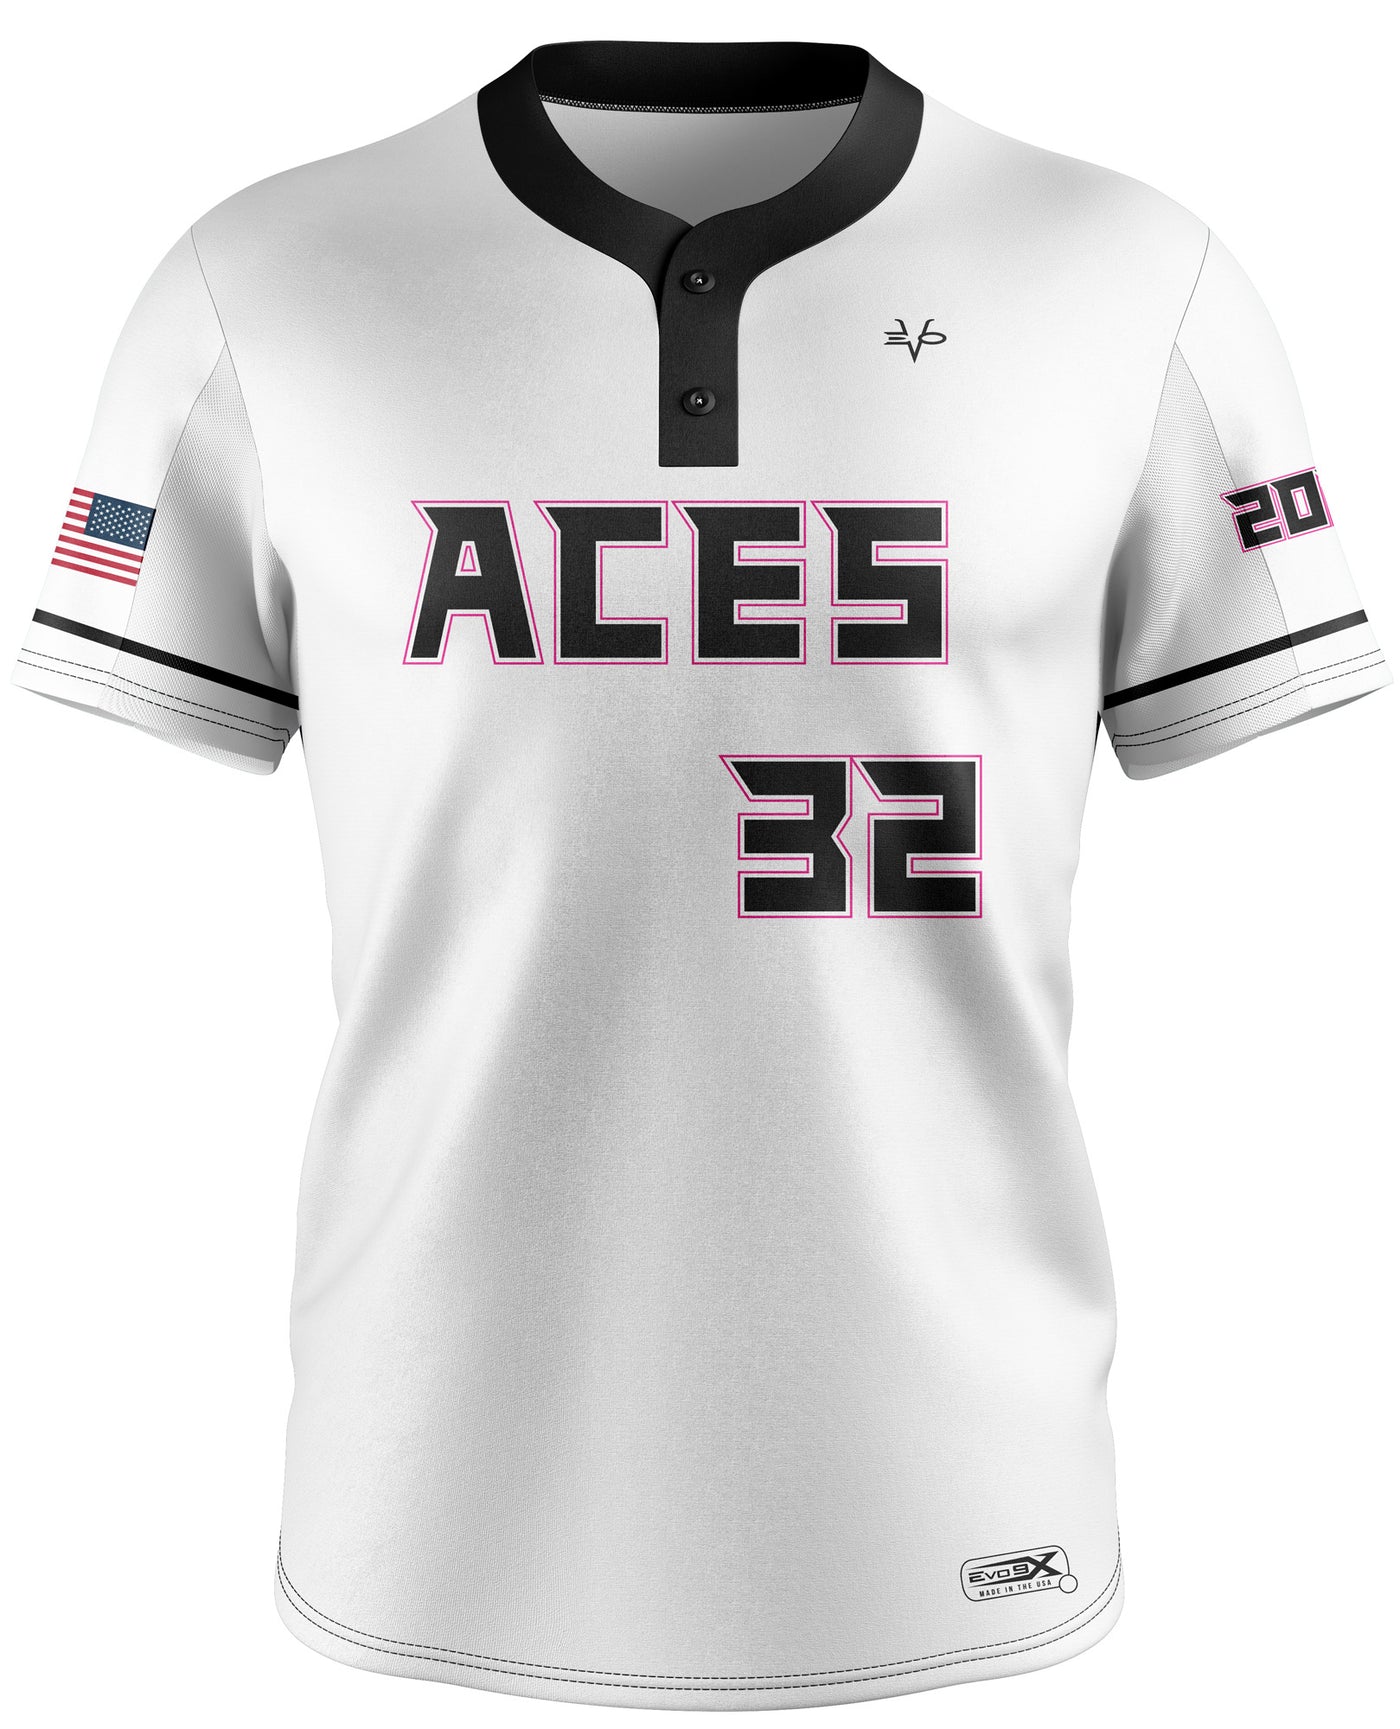 Aces Softball Sublimated 2-Button Softball Jersey White Women Large